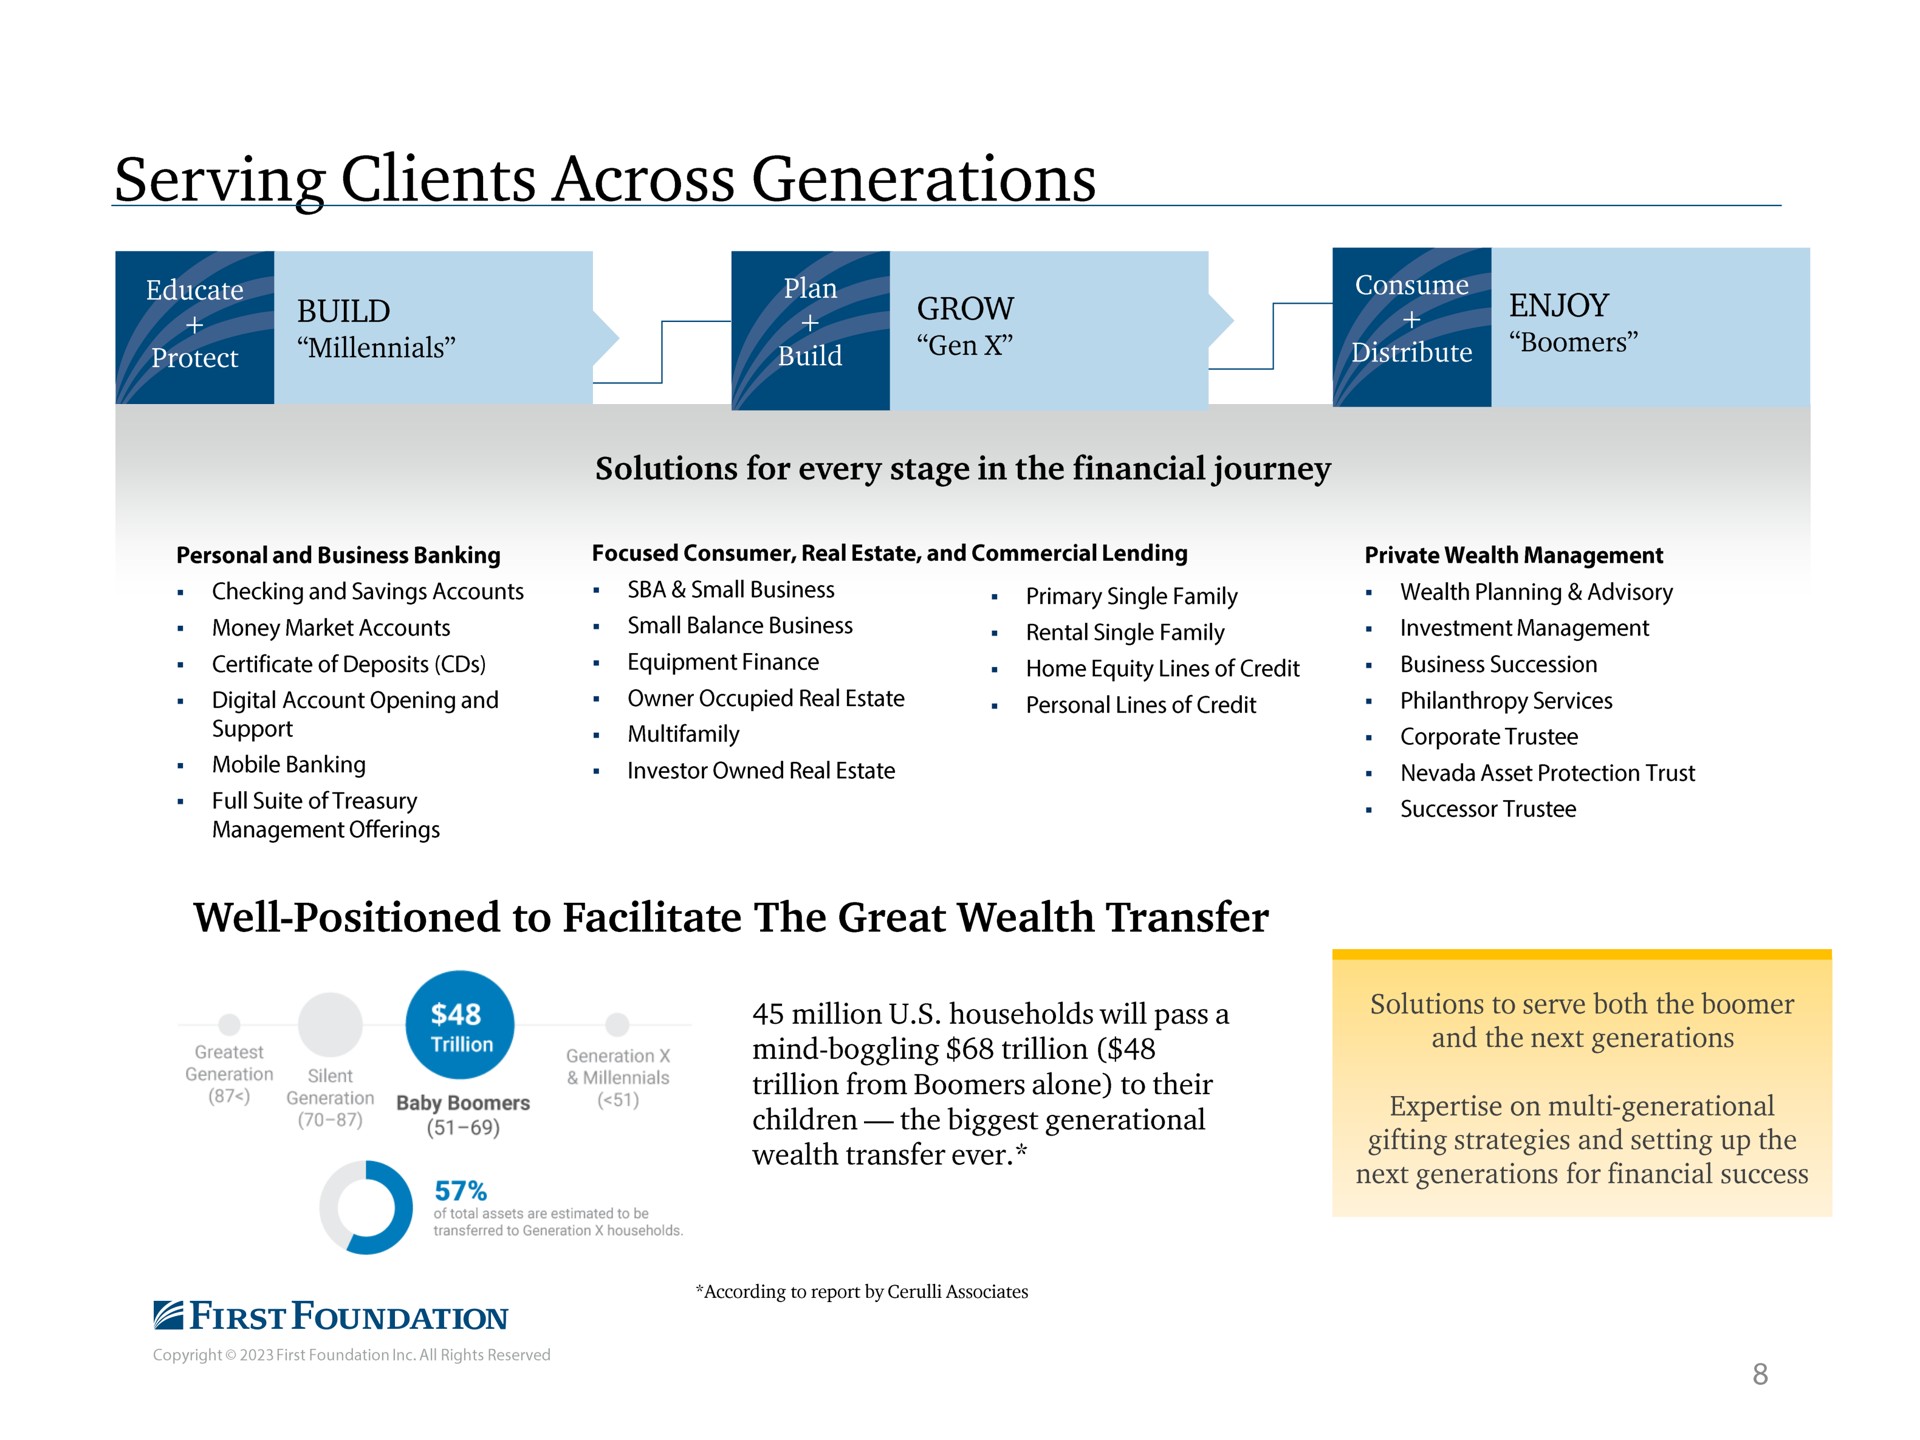 serving clients across generations wee build grow gam enjoy well positioned to facilitate the great wealth transfer | First Foundation